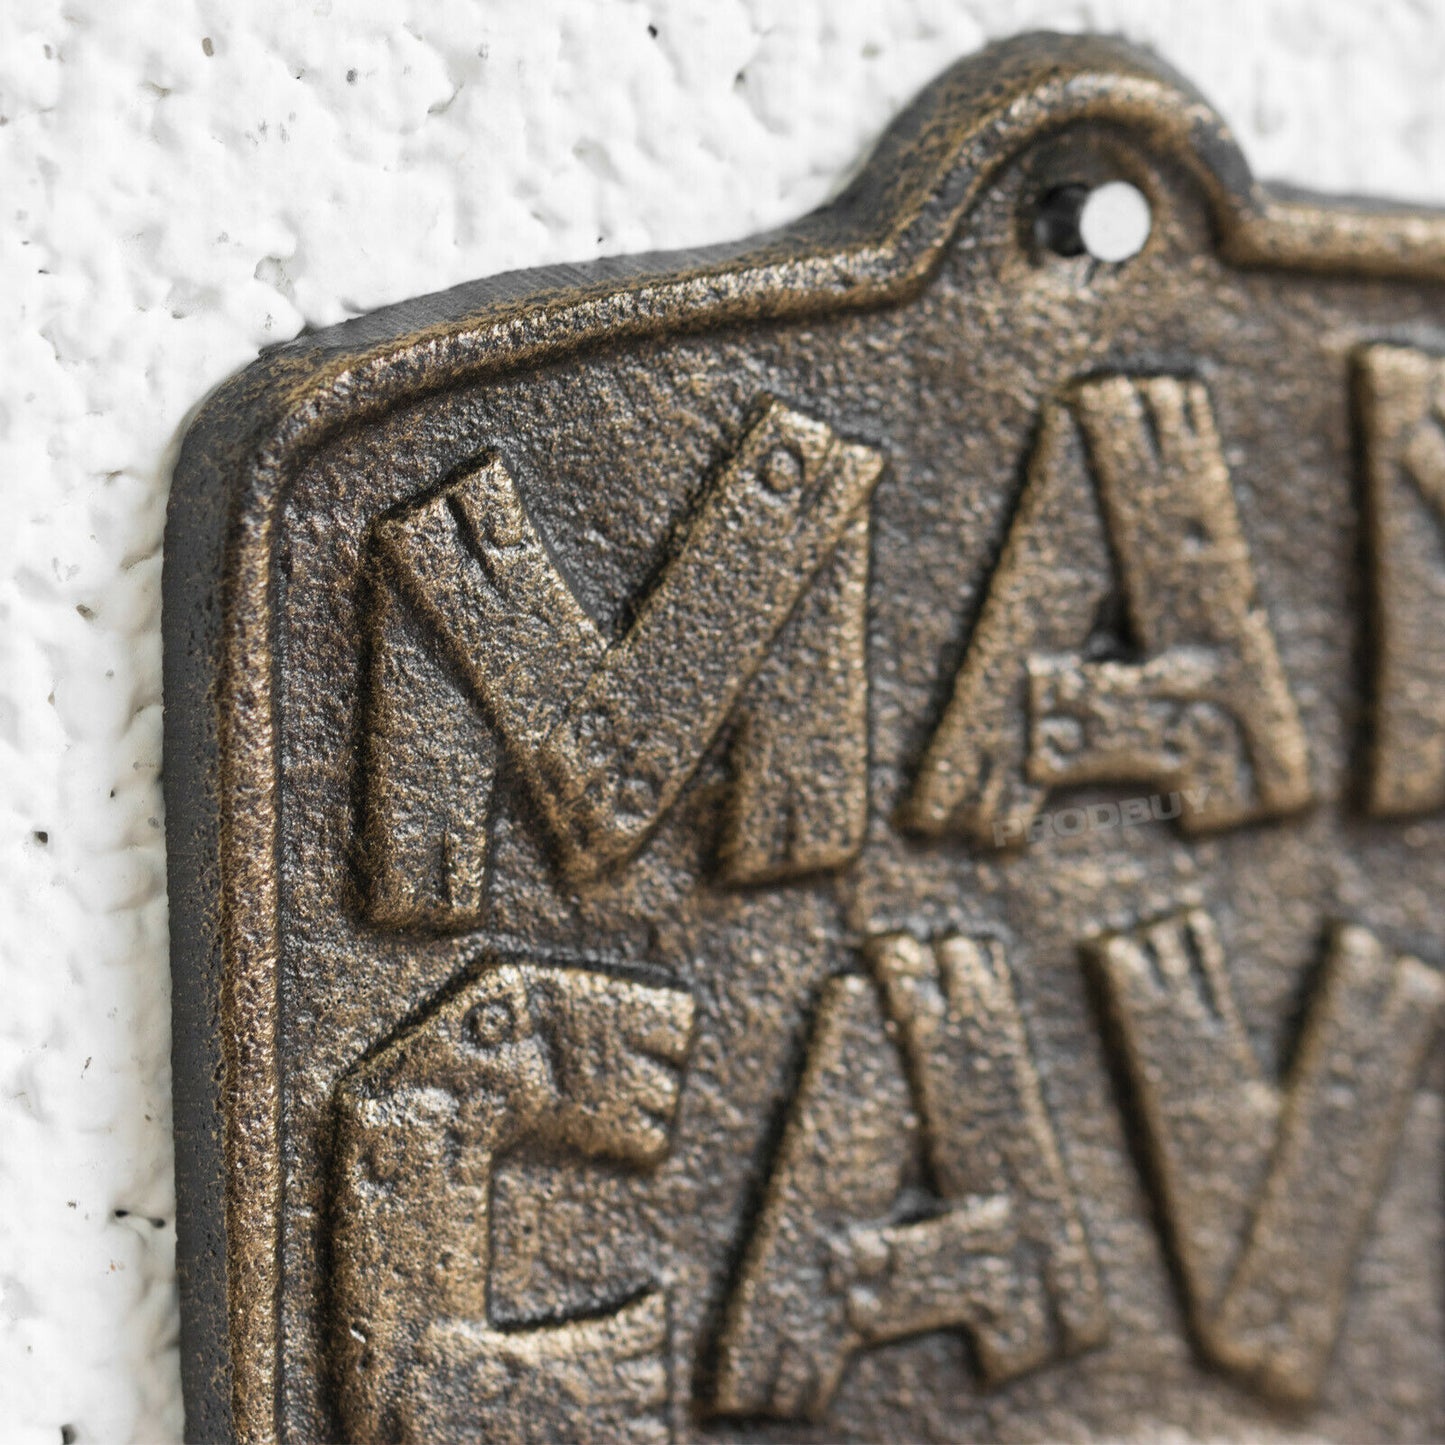 Cast Iron 'Man Cave' Wall Mounted Bottle Opener